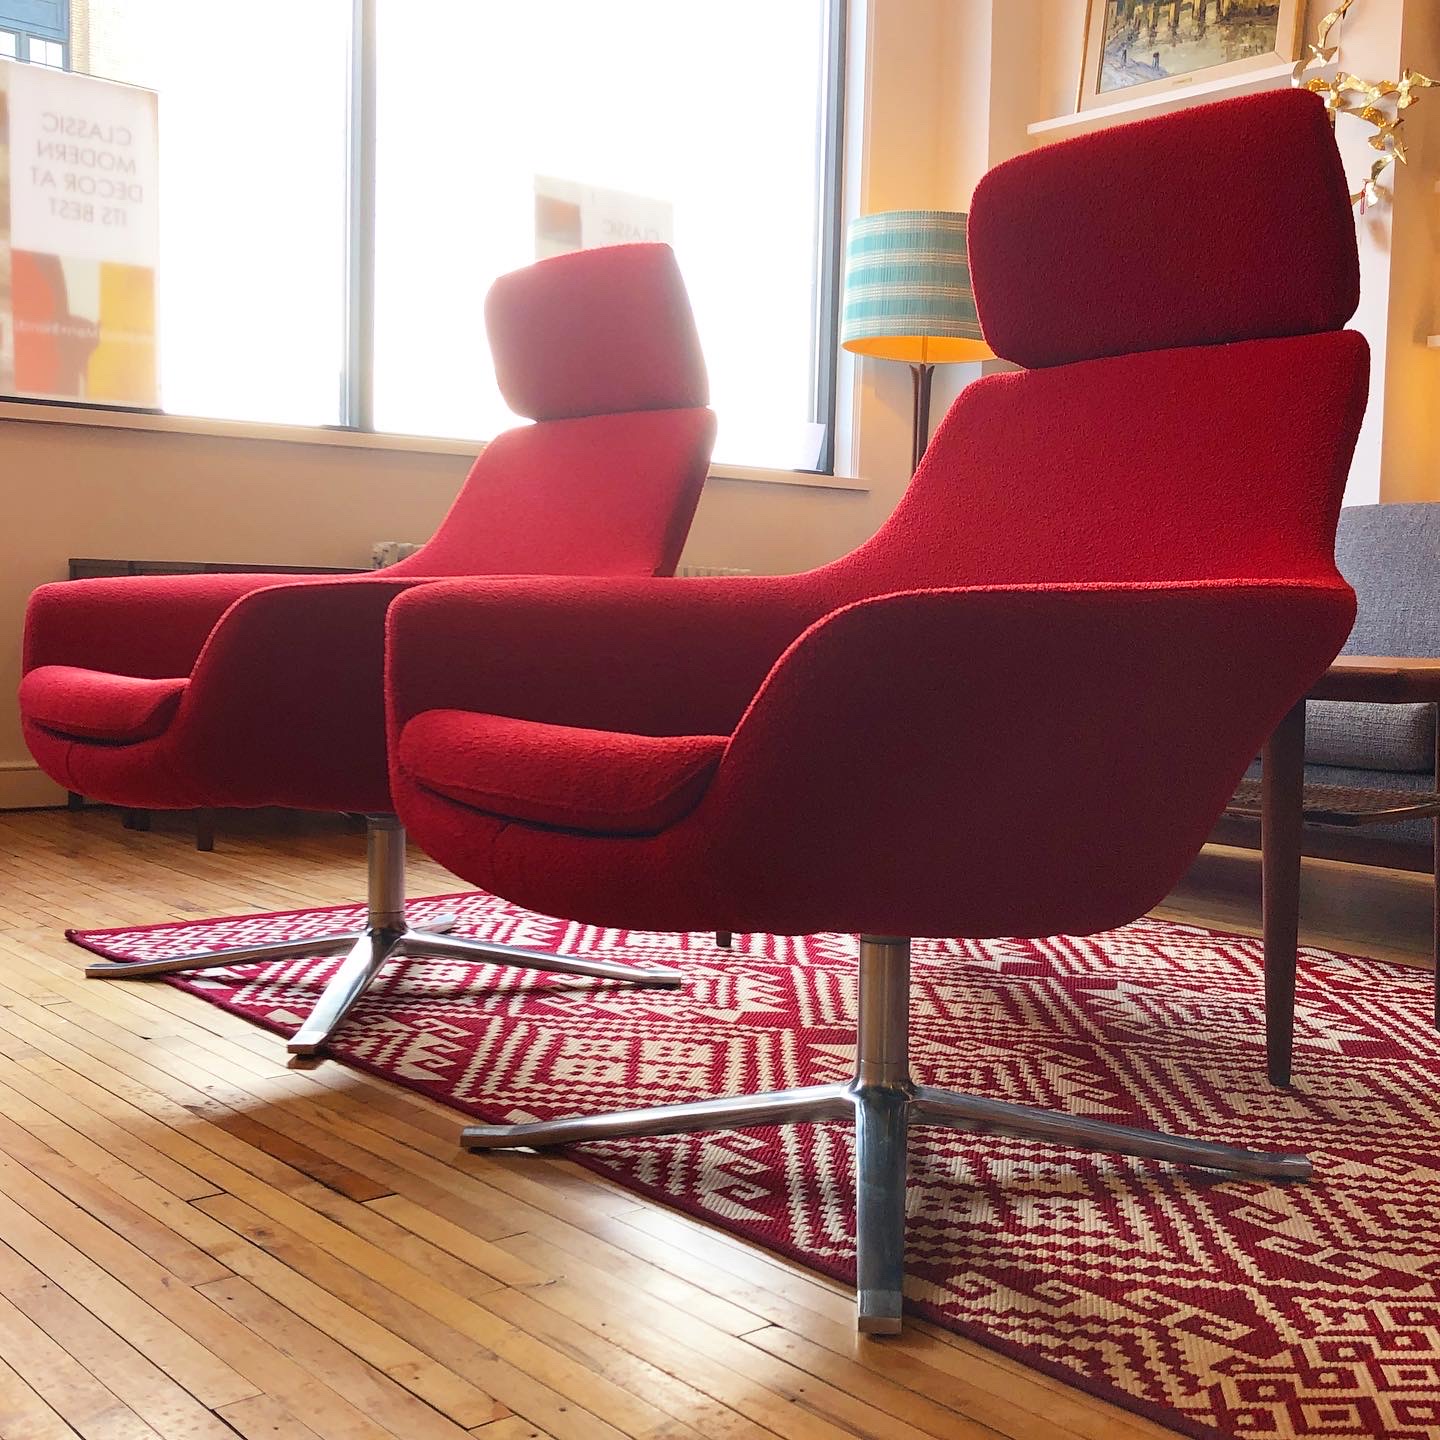 Steelcase Coalesce Bob lounge chair in red